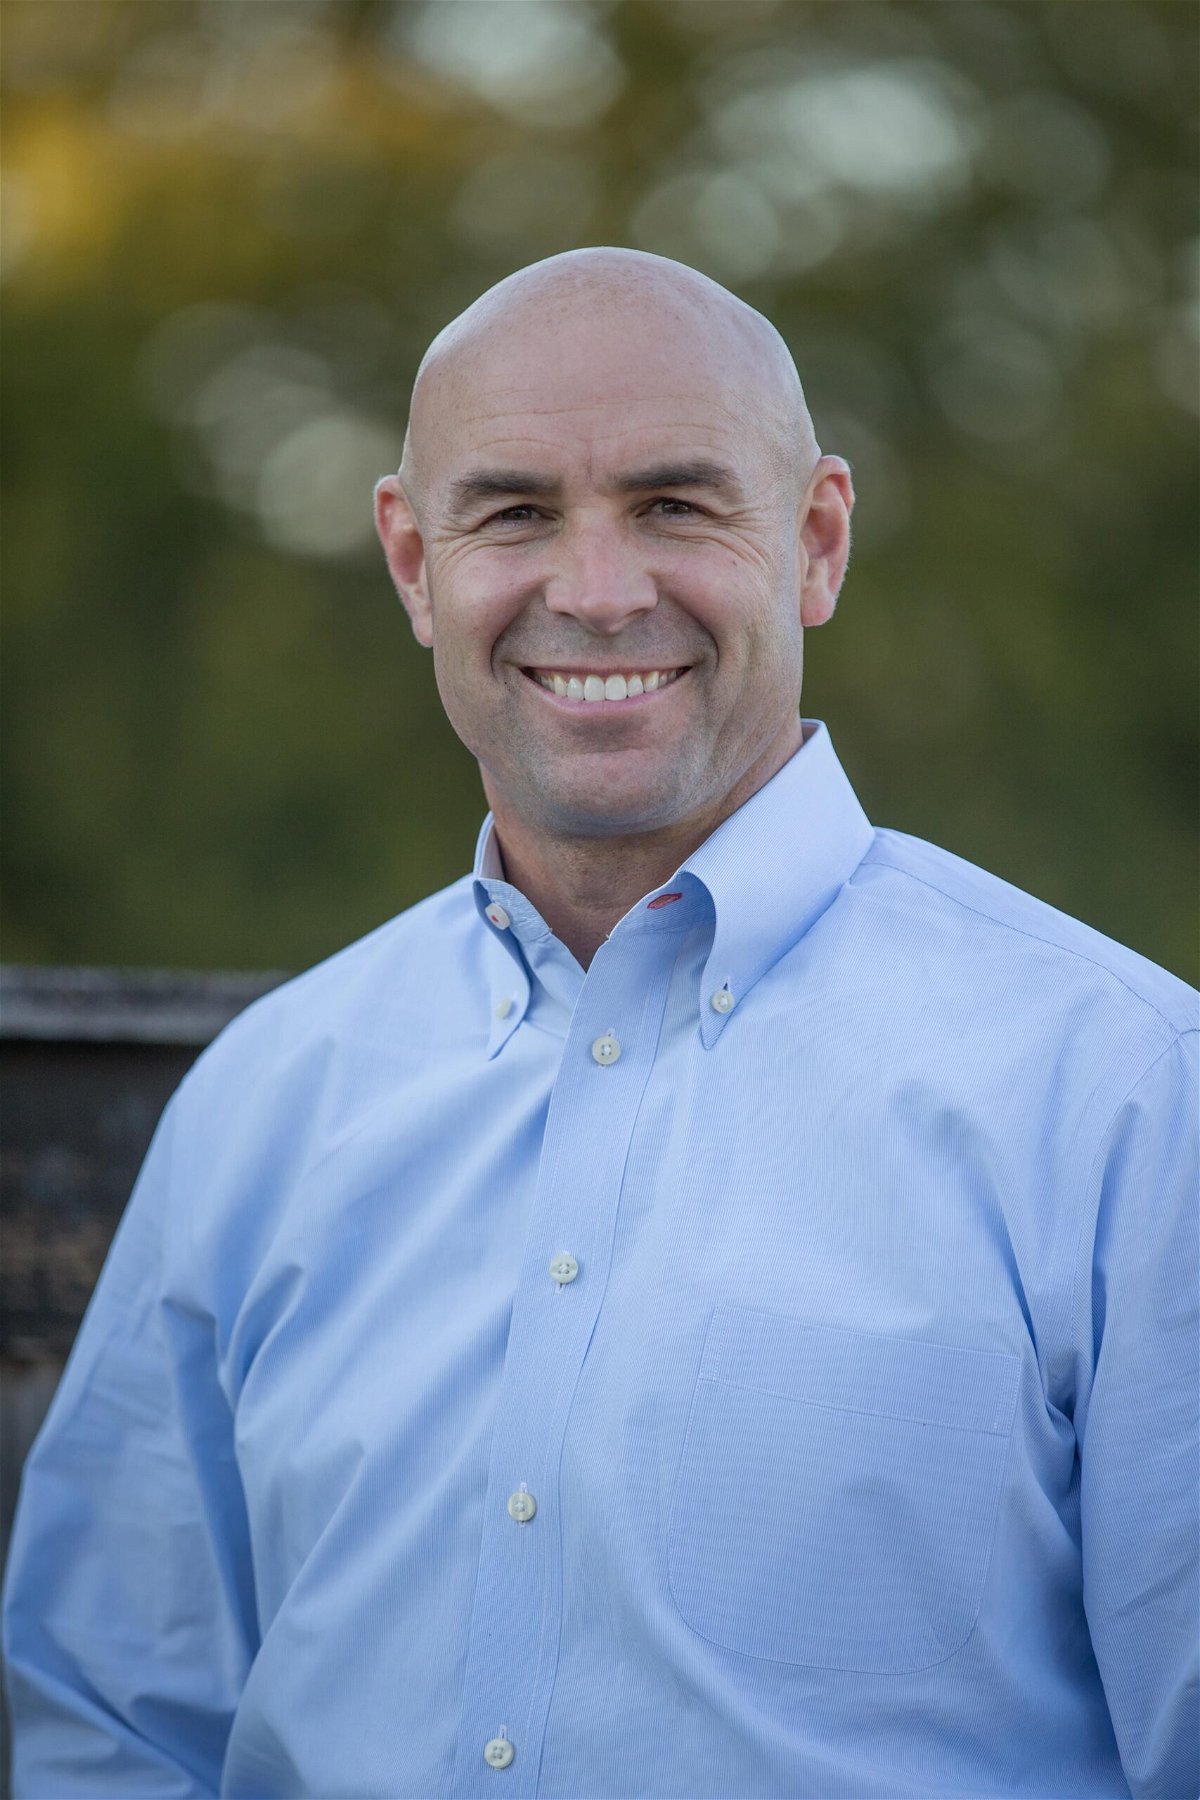 <i>From Jake Ellzey for Texas</i><br/>Texas state Rep. Jake Ellzey will win the special election runoff in Texas' 6th Congressional District